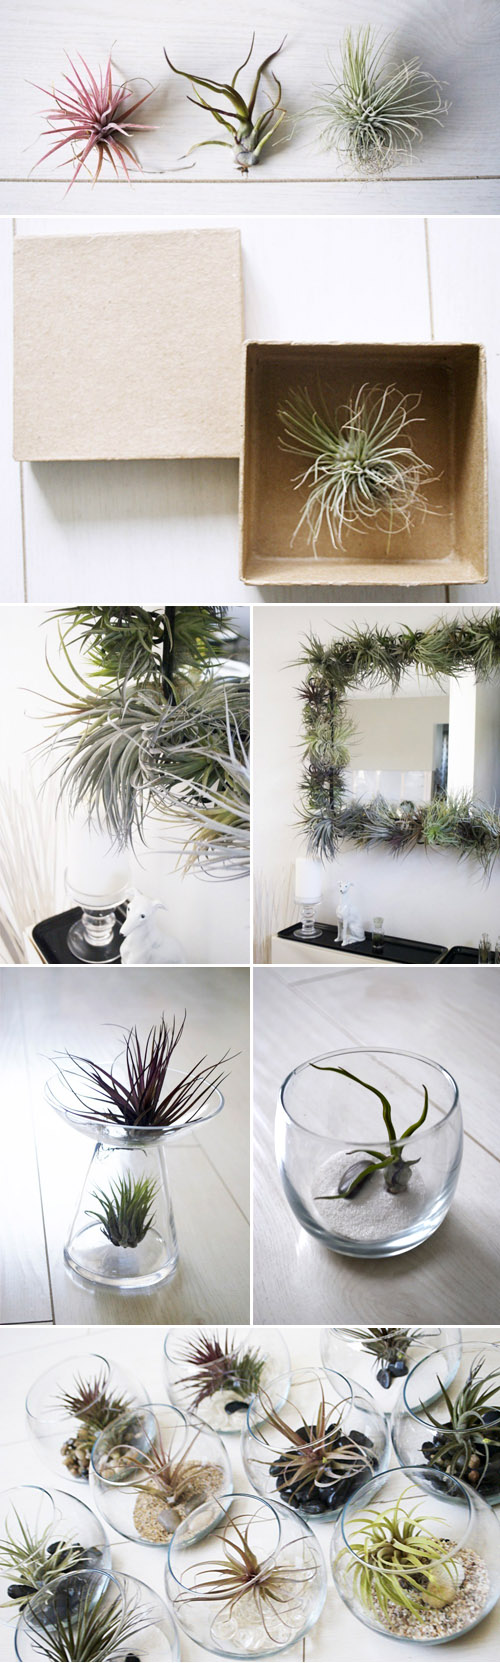 beautiful tillandsia air plants from To Hold, creative botanical wedding favors and decor